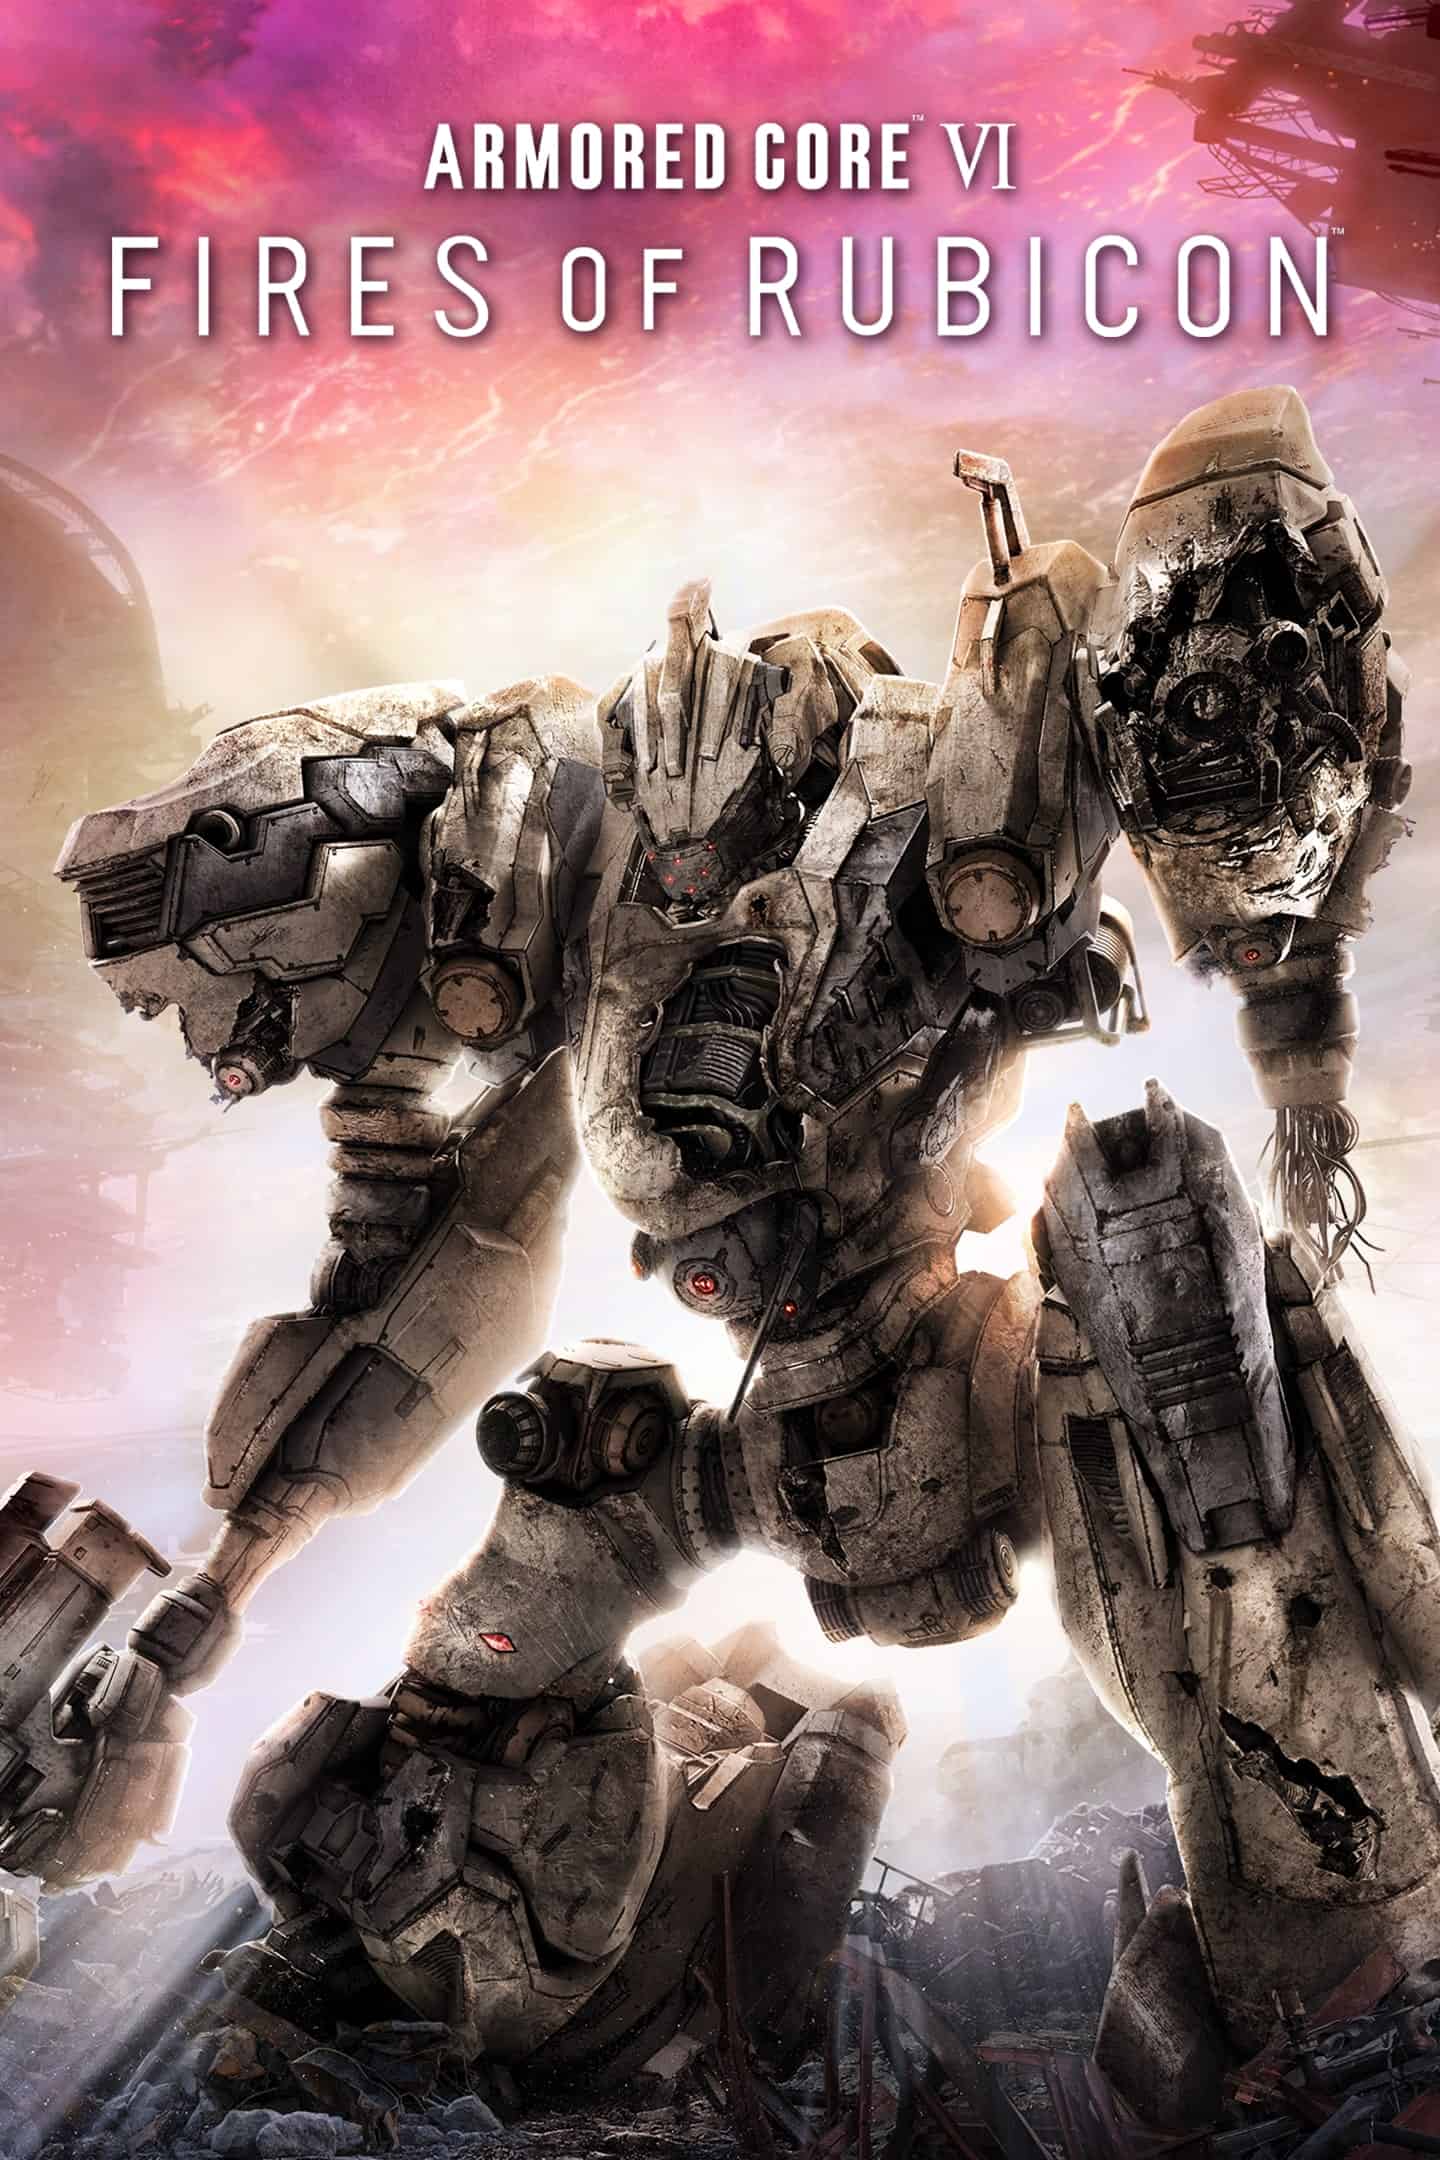 Branching Path: Armored Core VI is an Armored Core game that will